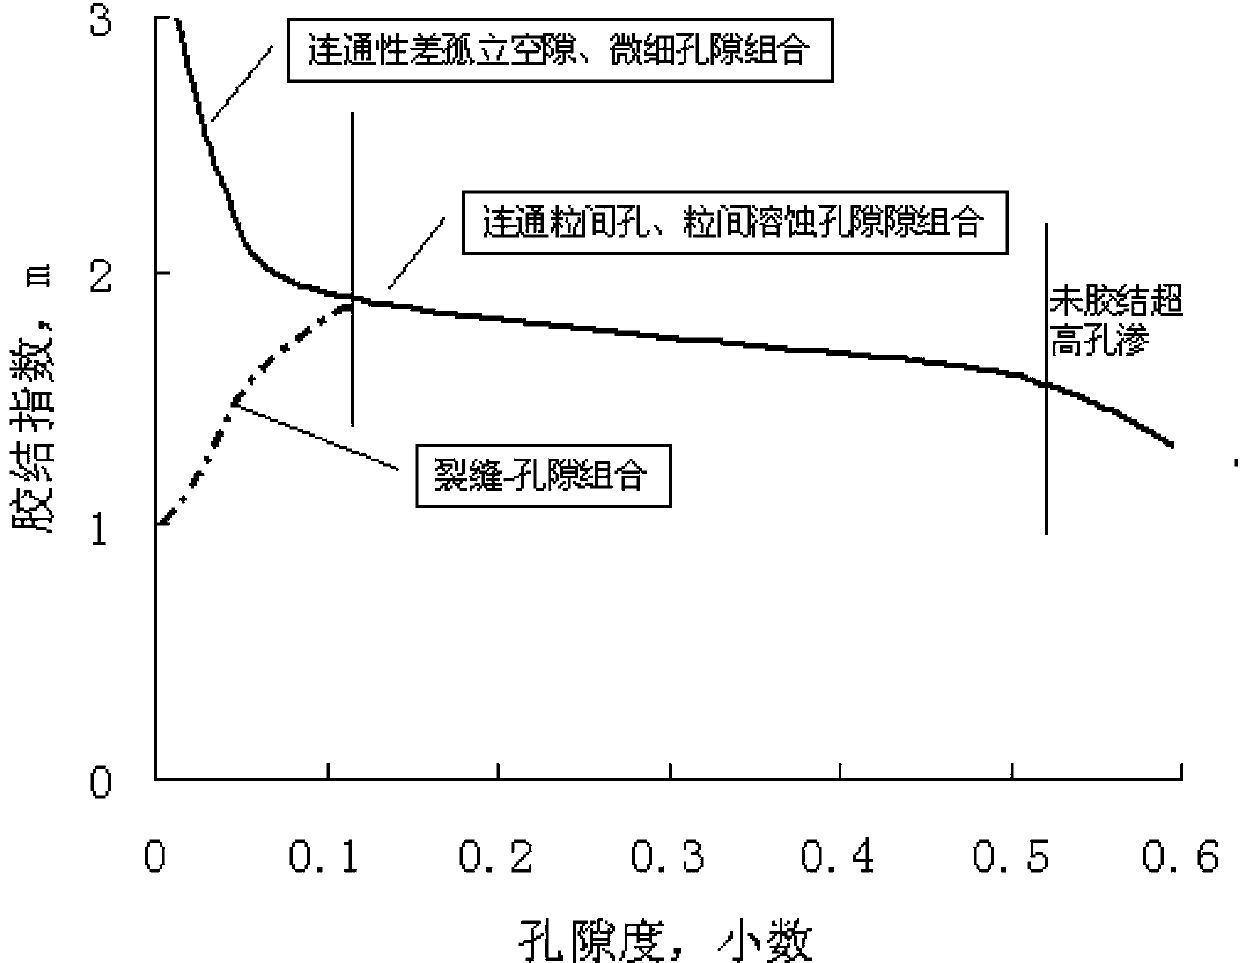 Hydrocarbon saturation evaluation method based on rock electrical structure coefficient